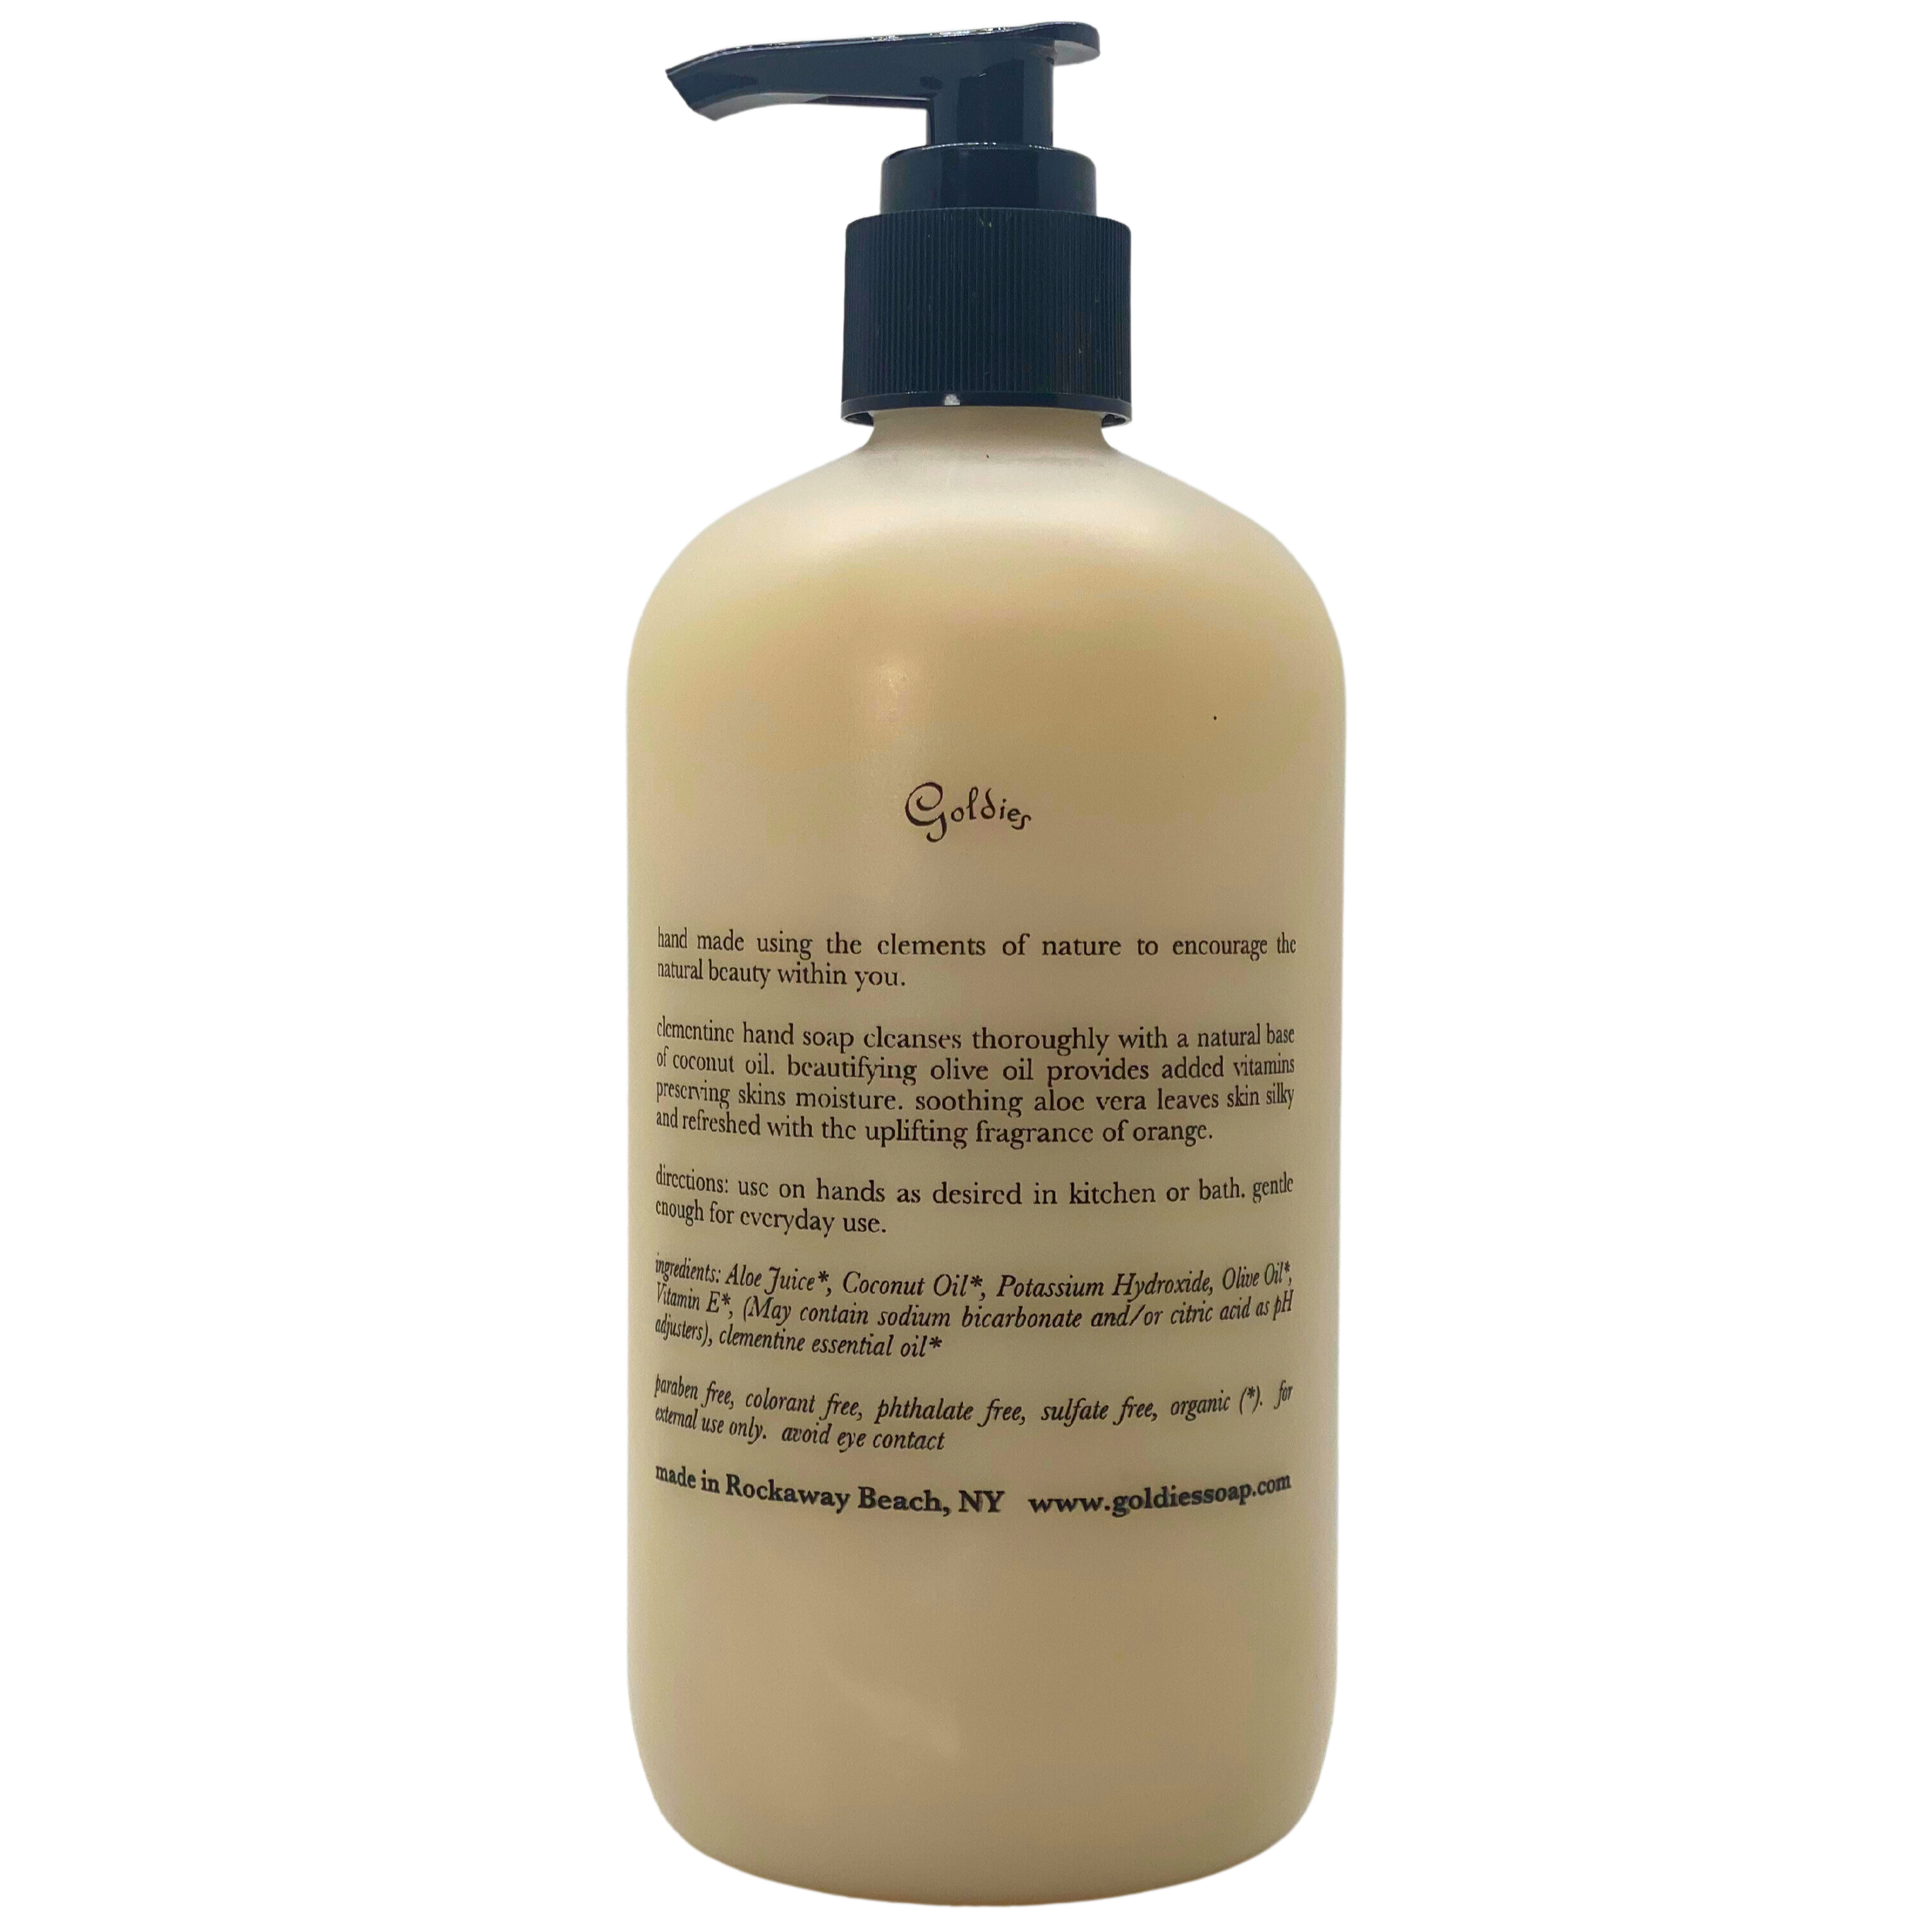 Clementine Hand Soap